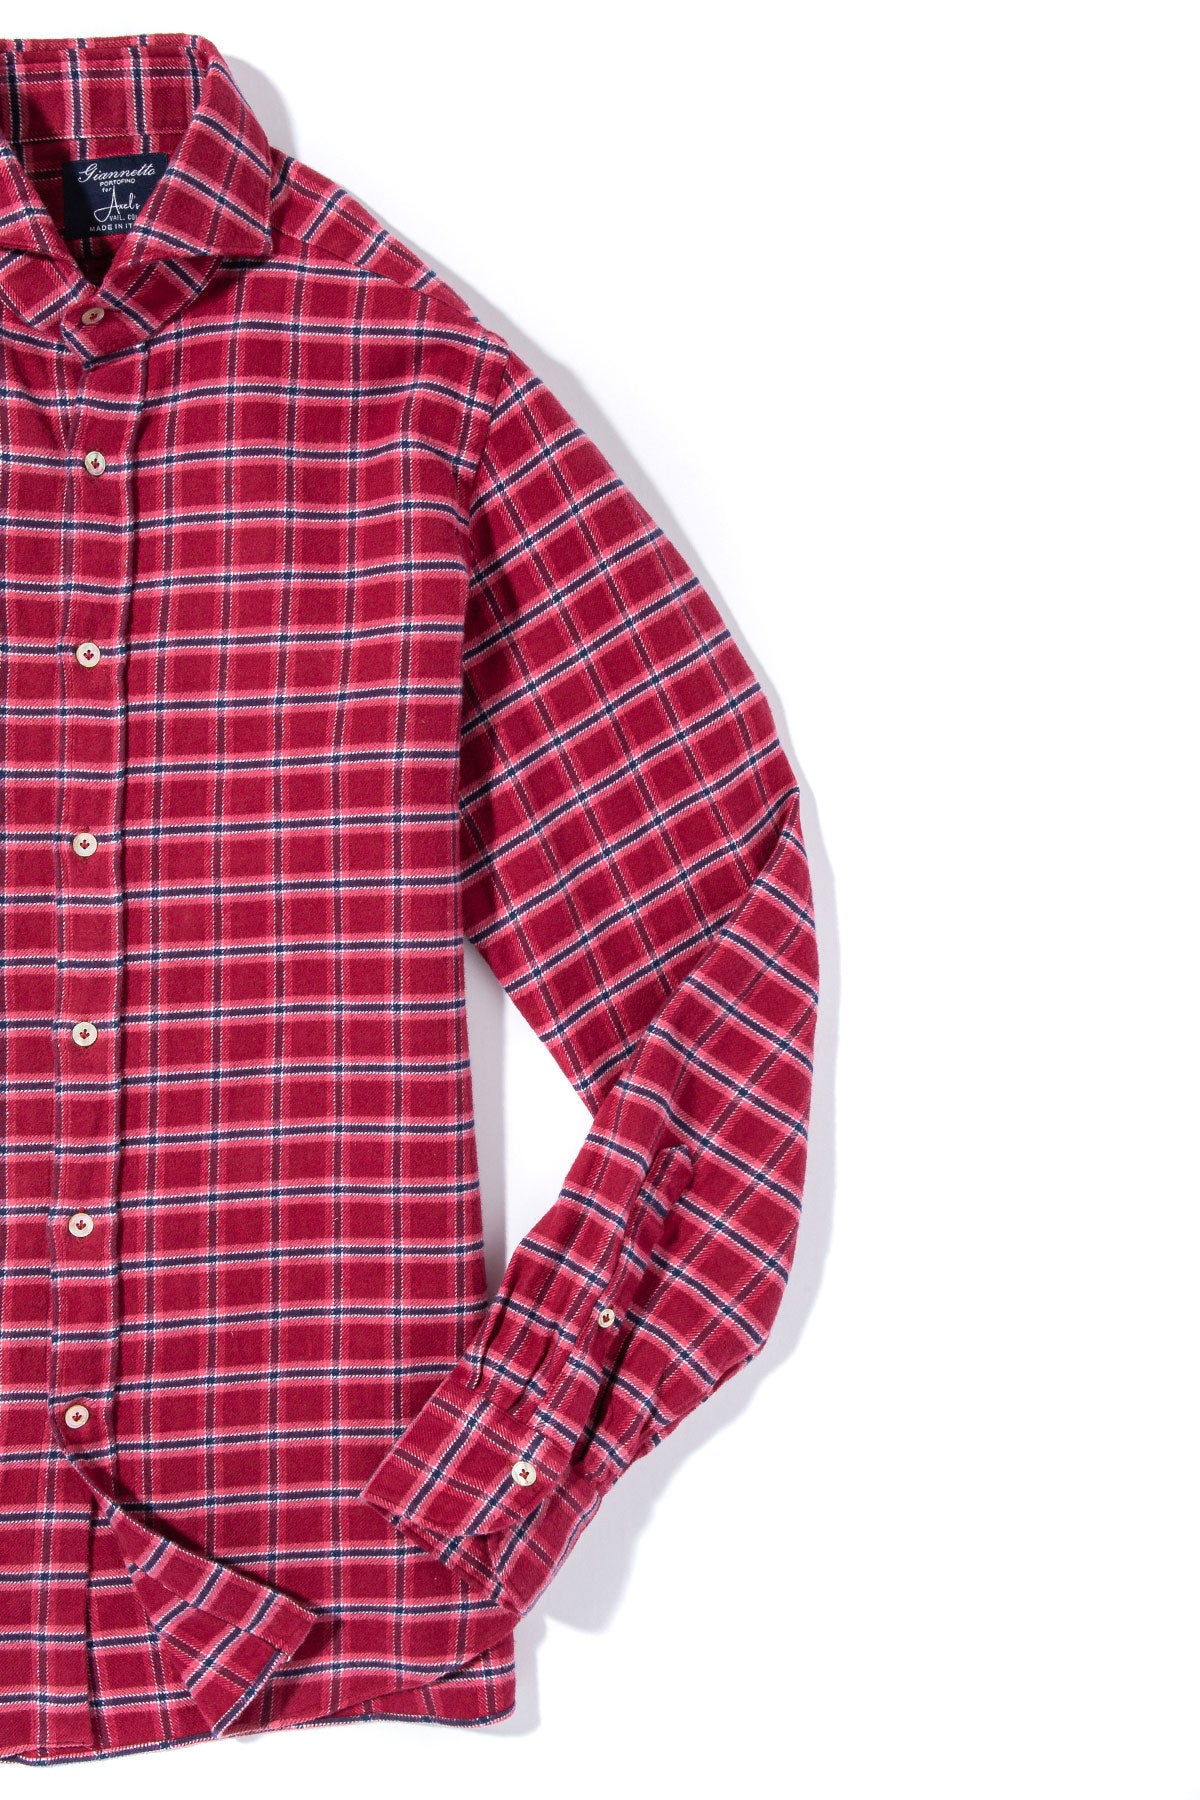 Alexander Cotton Flannel in Pink and Blue | Mens - Shirts | Axels GP